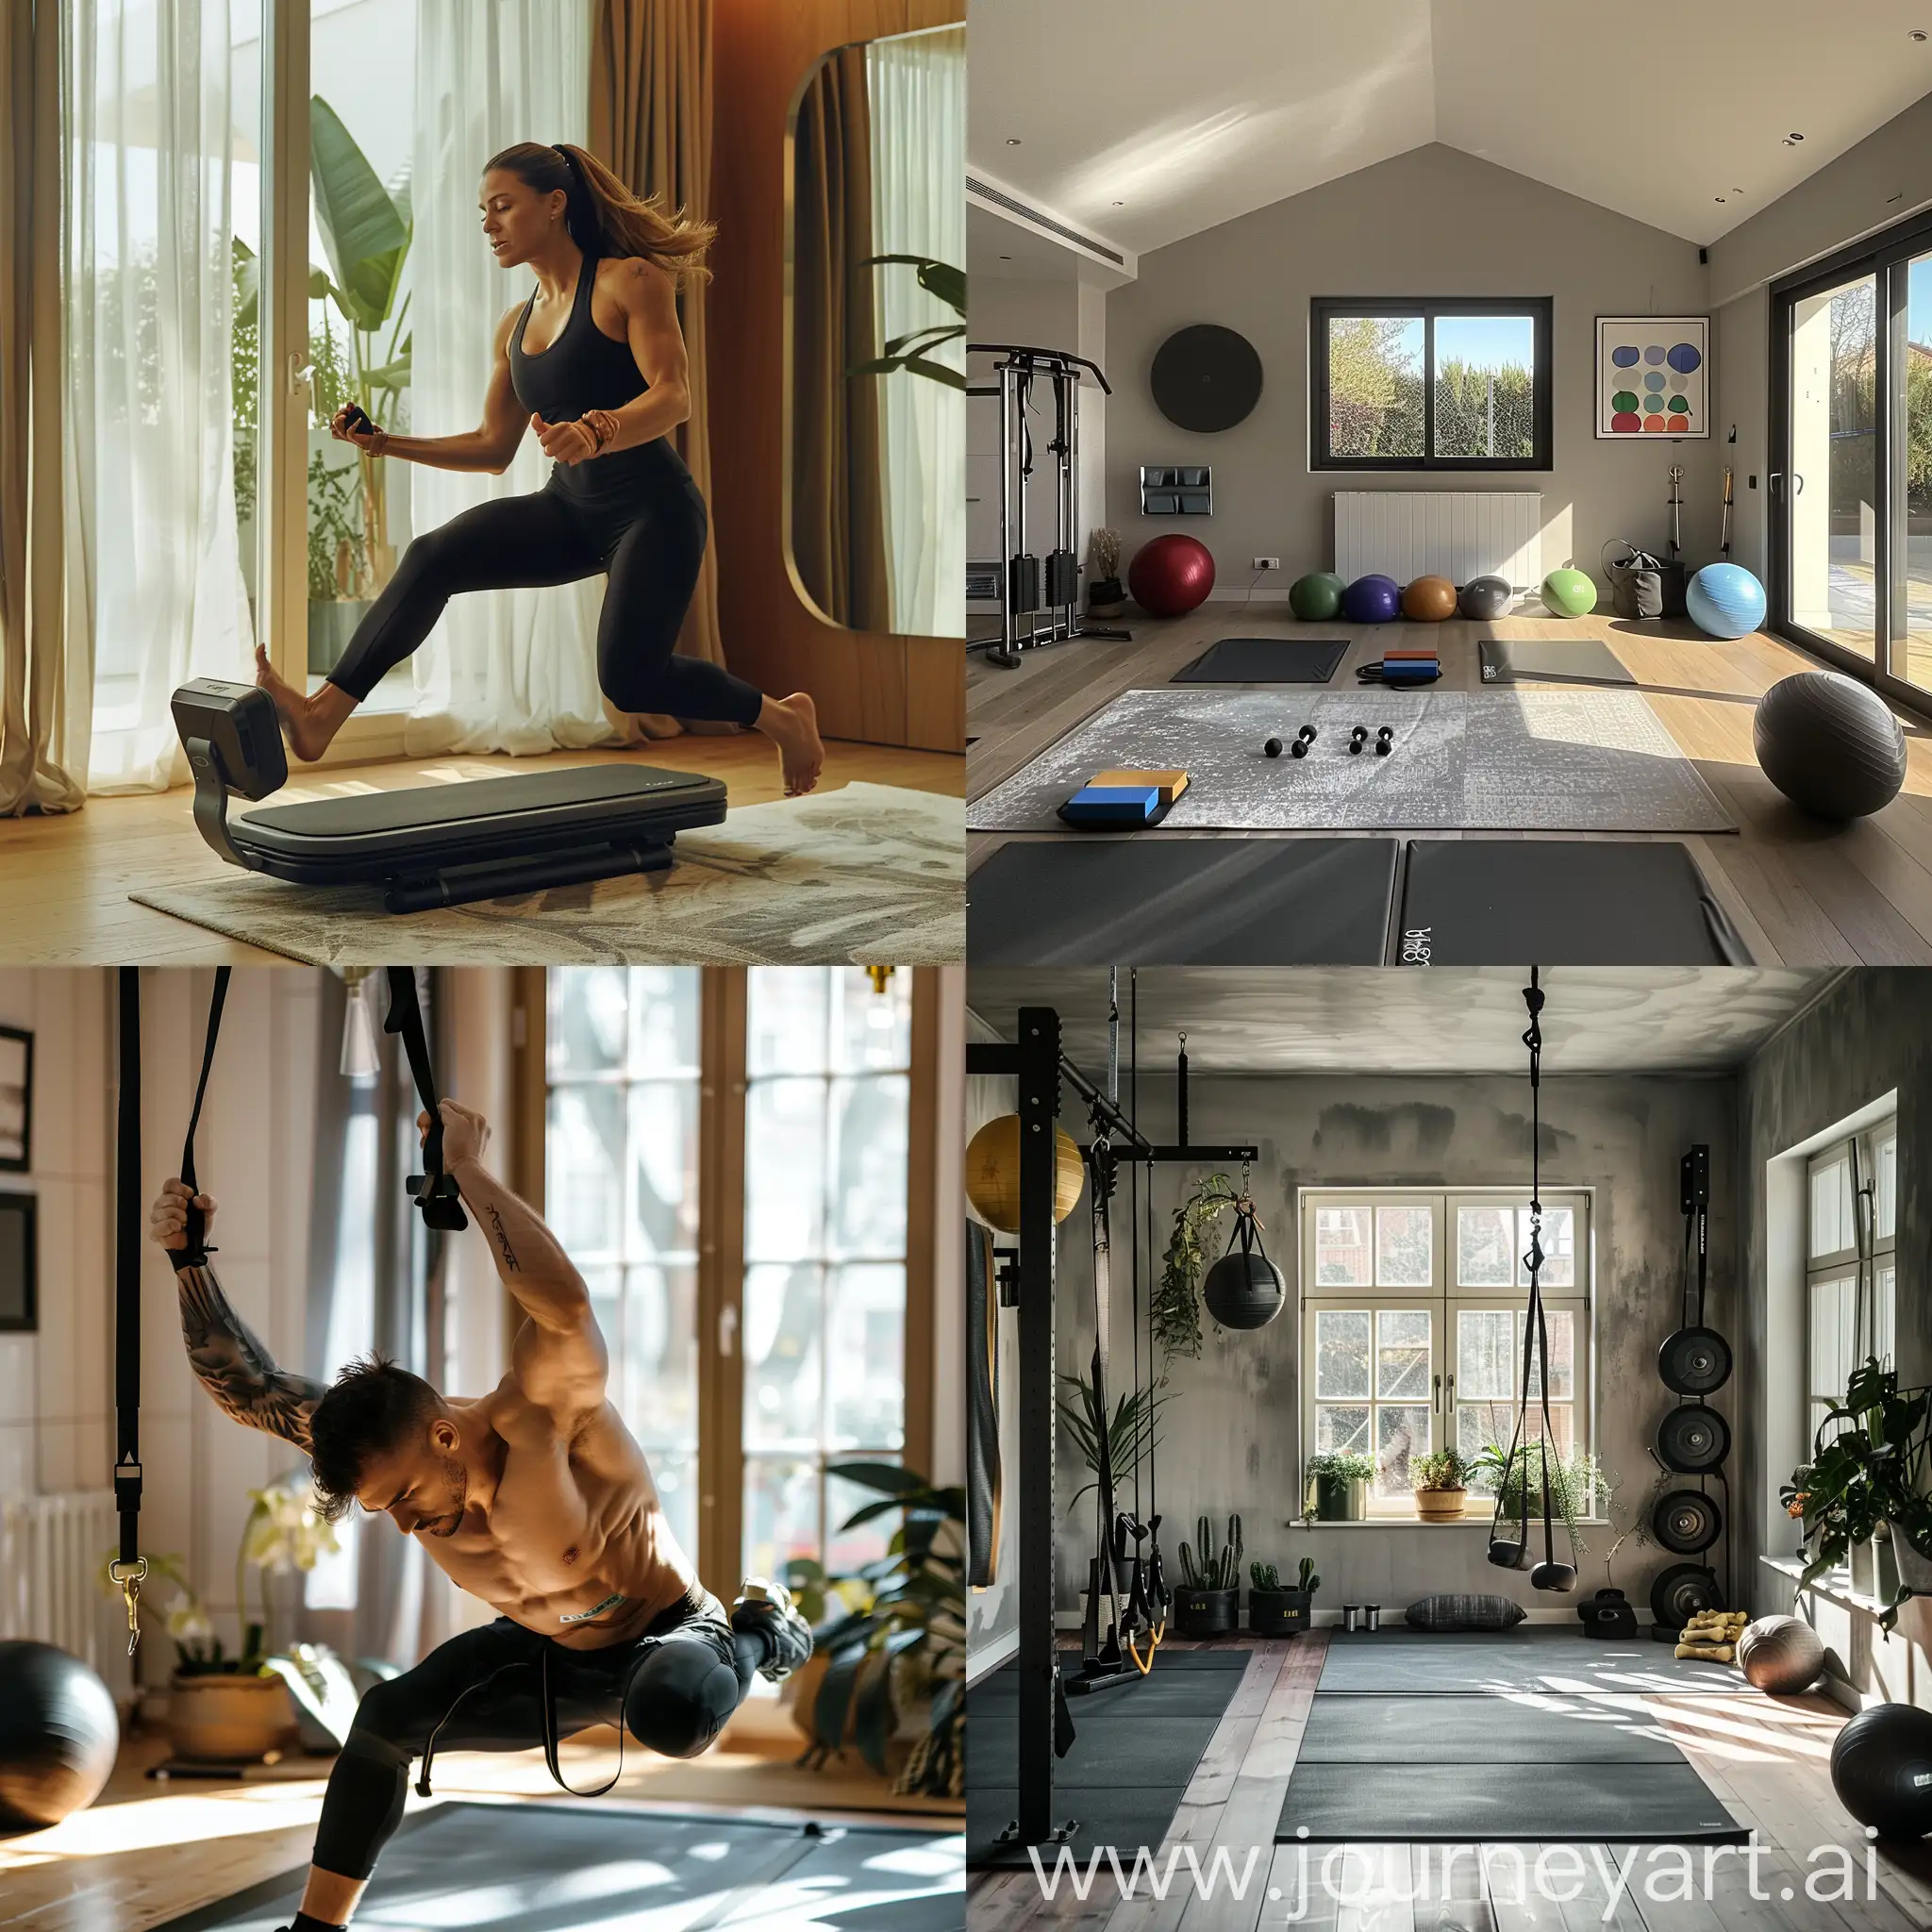 Home-Exercise-Course-Person-in-Gym-Attire-Doing-Workout-Routine